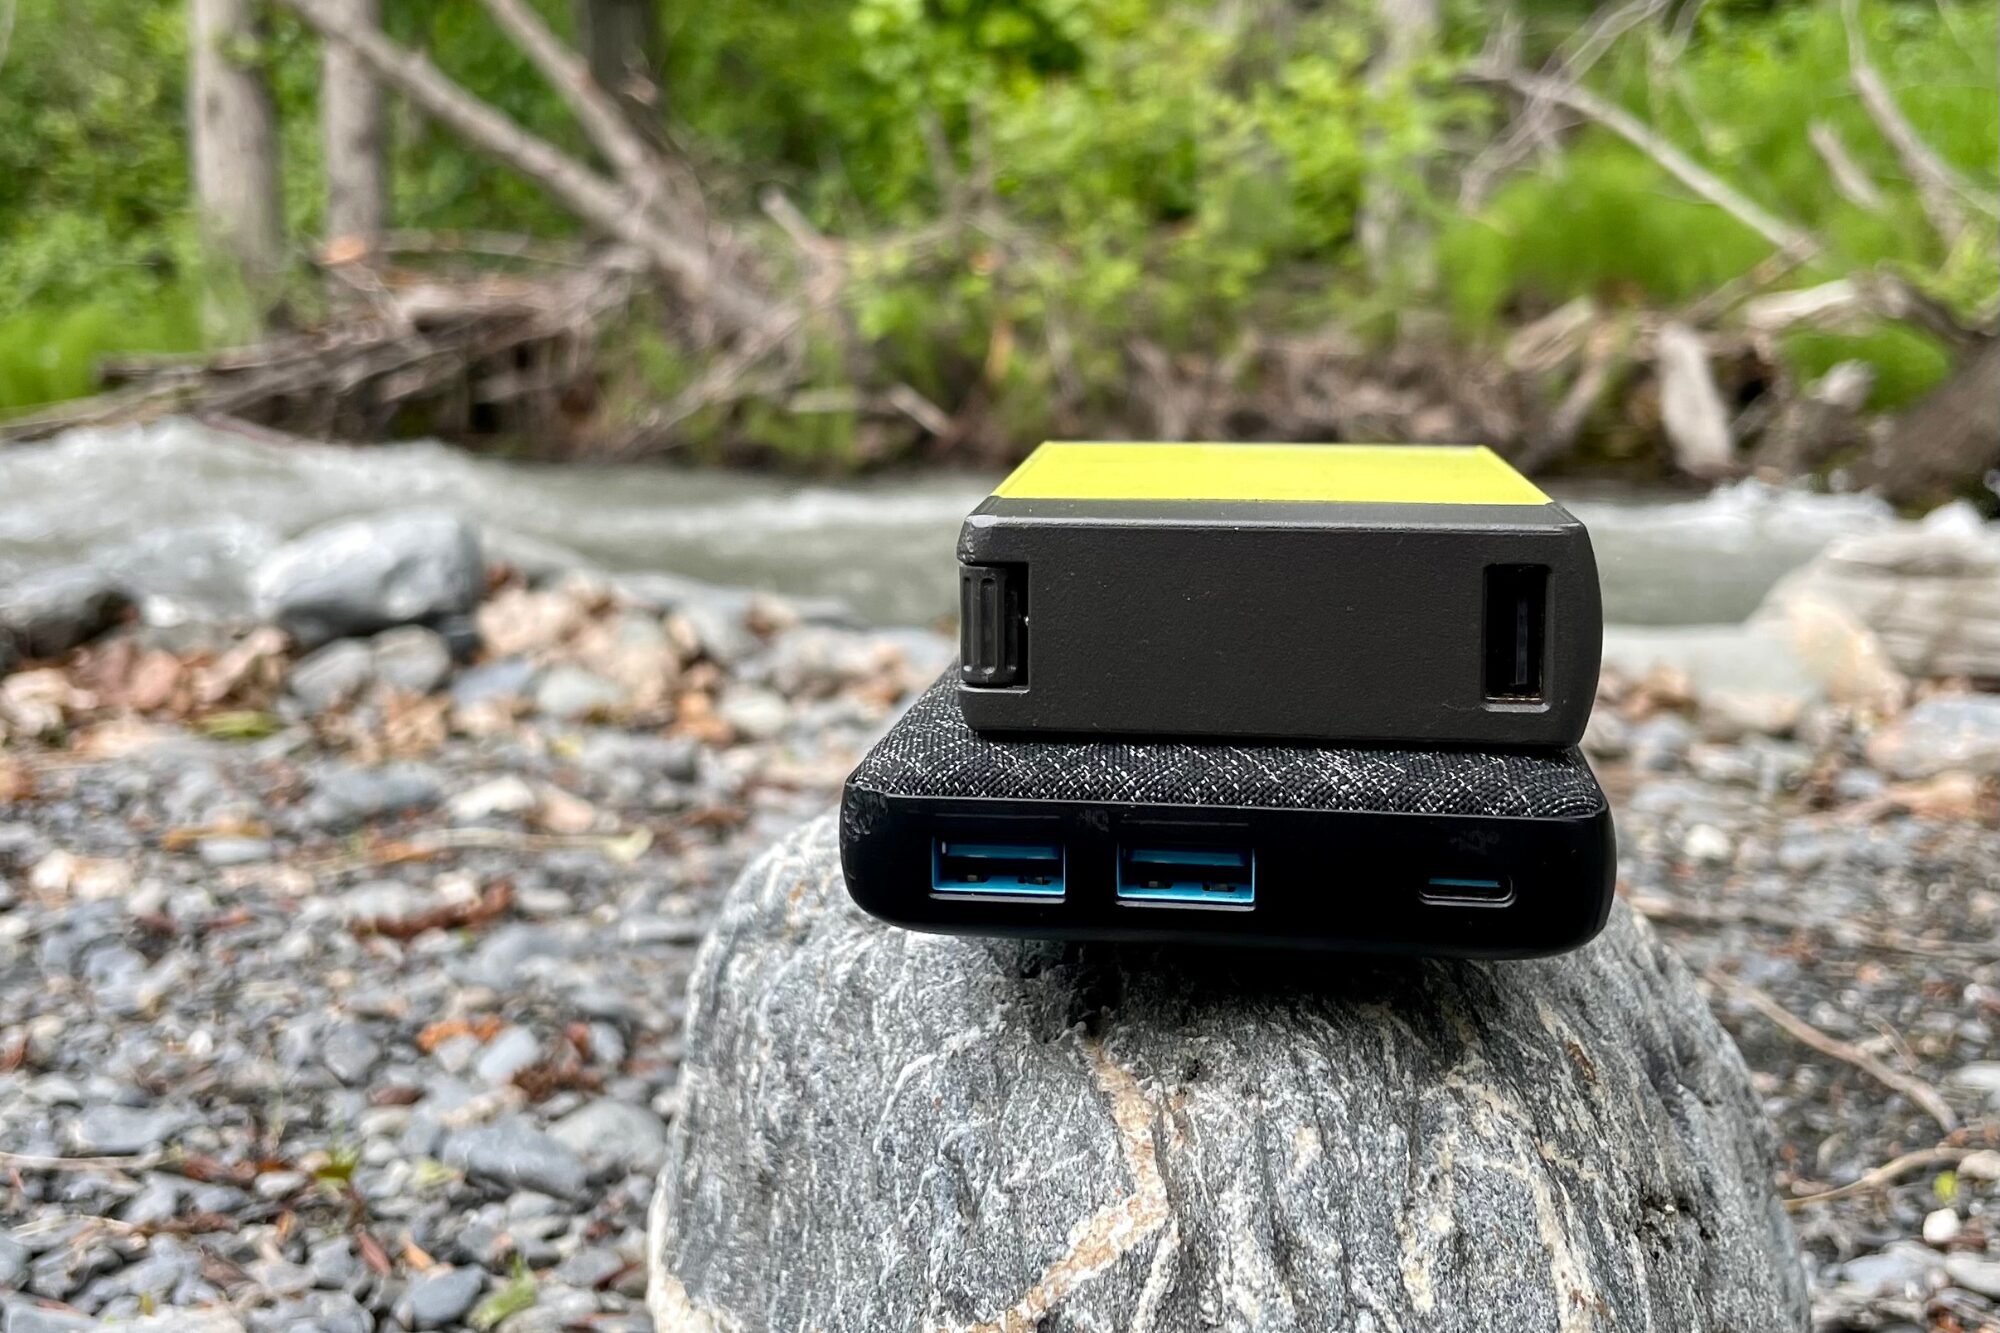 Two power banks are stacked on top of each other, showing the different ports and sizes. They're sitting on a stone in front of a river.